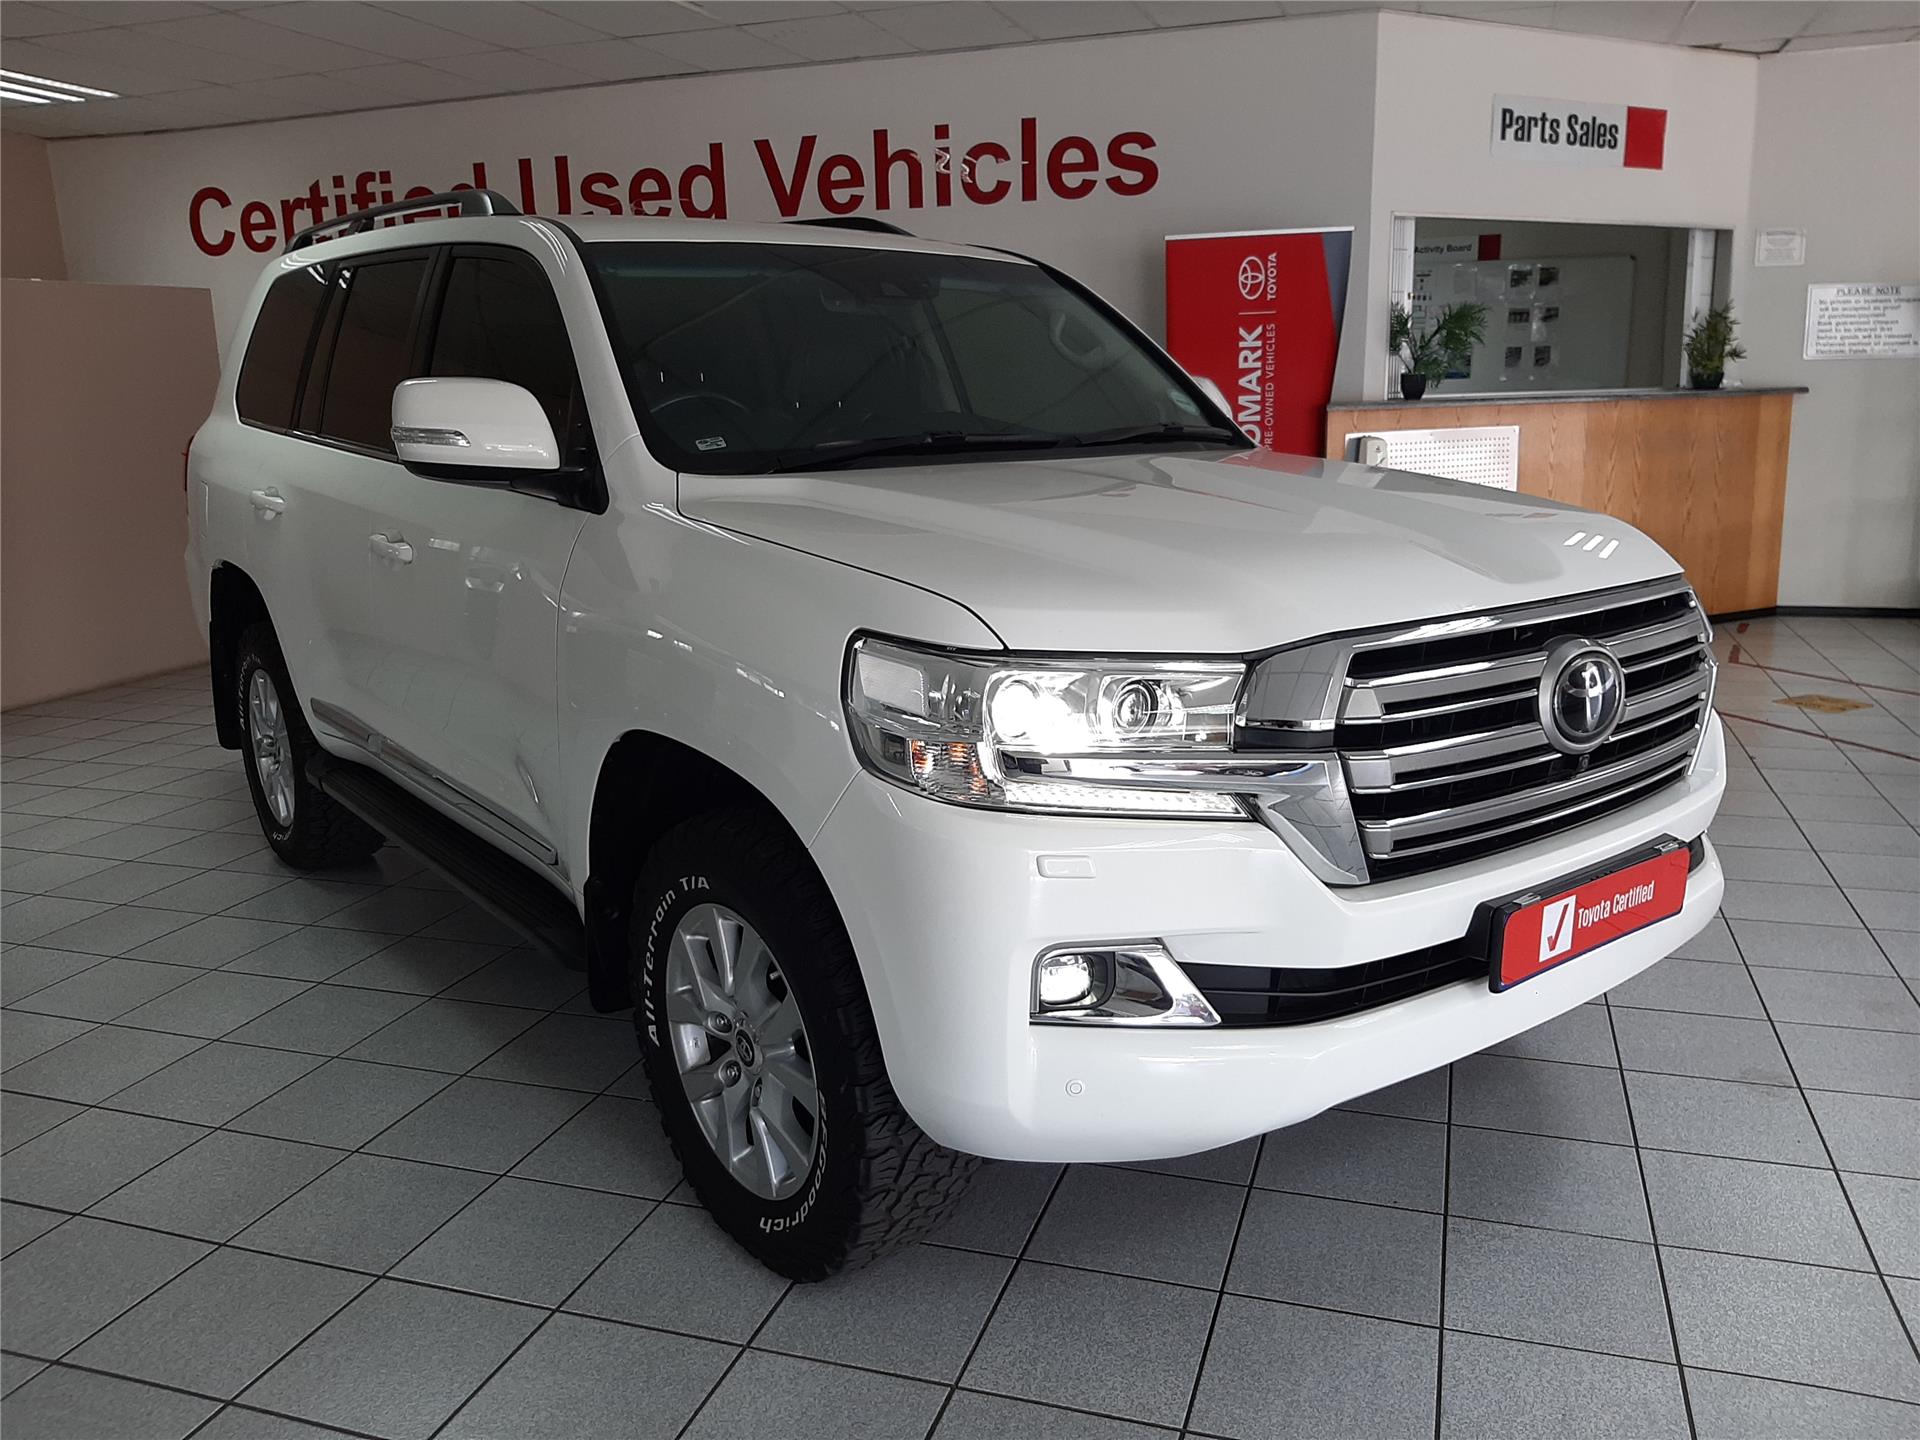 2018 Toyota Land Cruiser 200  for sale - 1019362/1